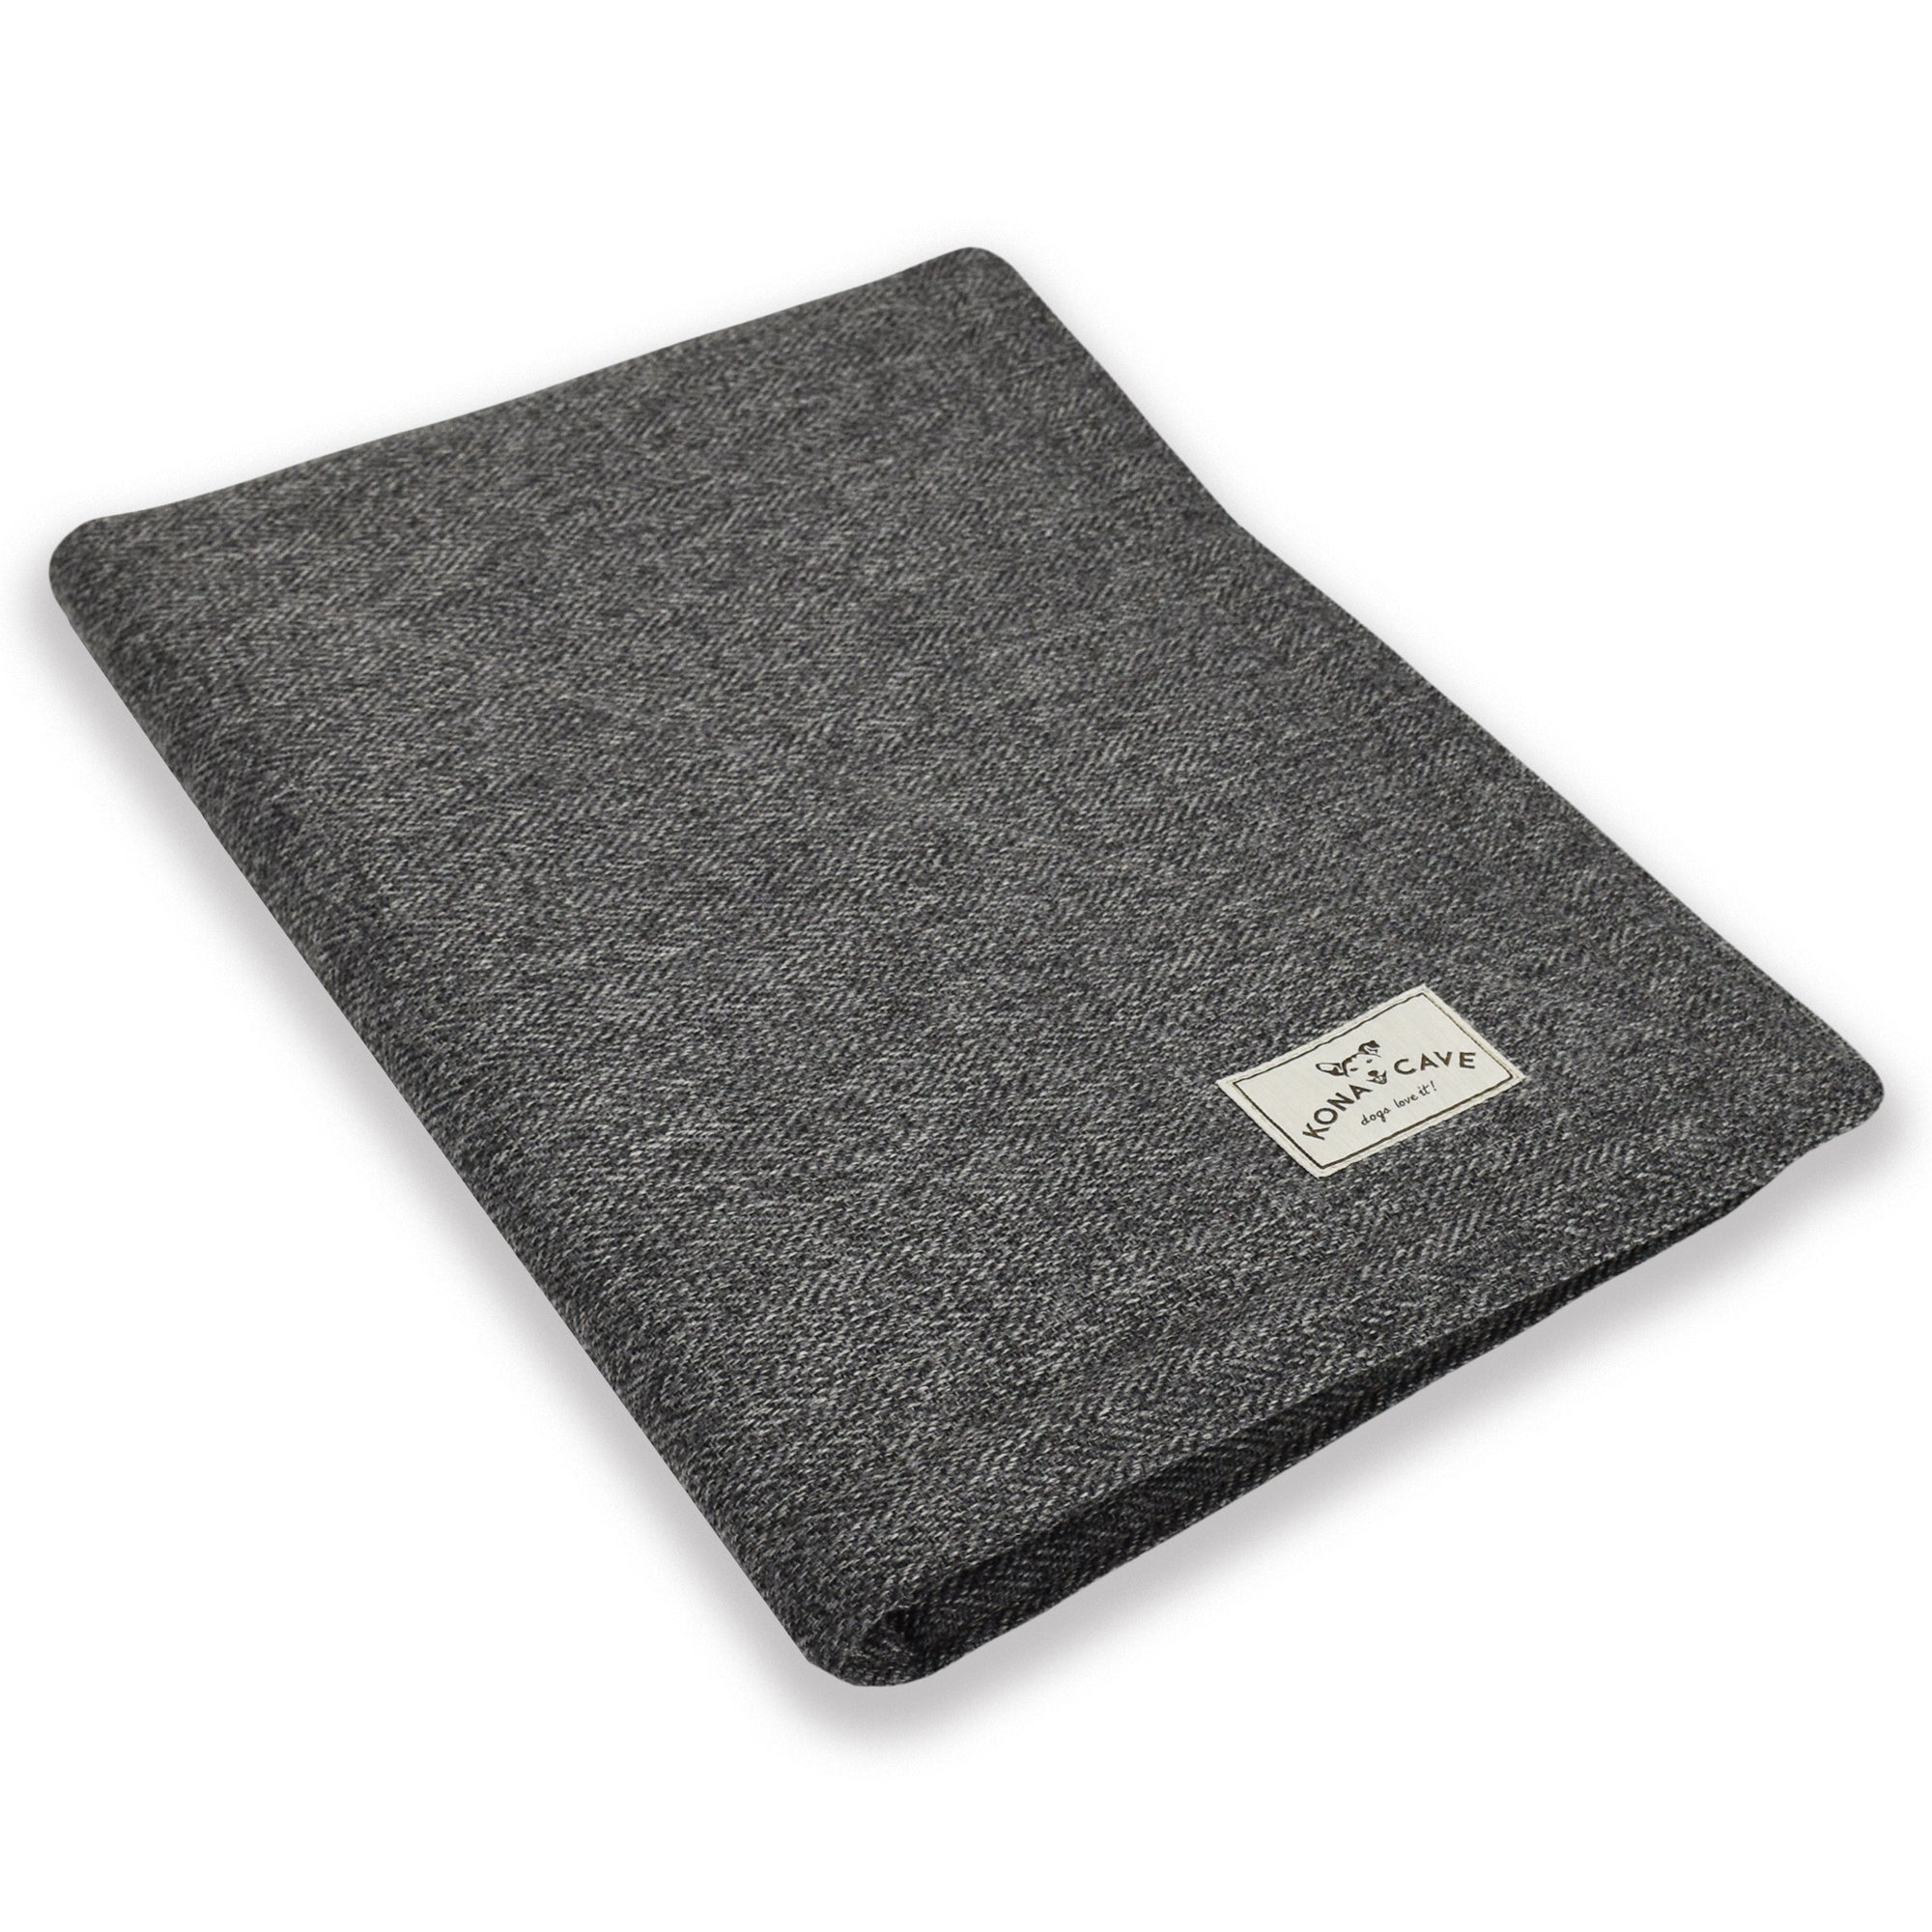 KONA CAVE® Furniture Blanket in Grey Herringbone is big enough for you and your pup to share on a wintery night